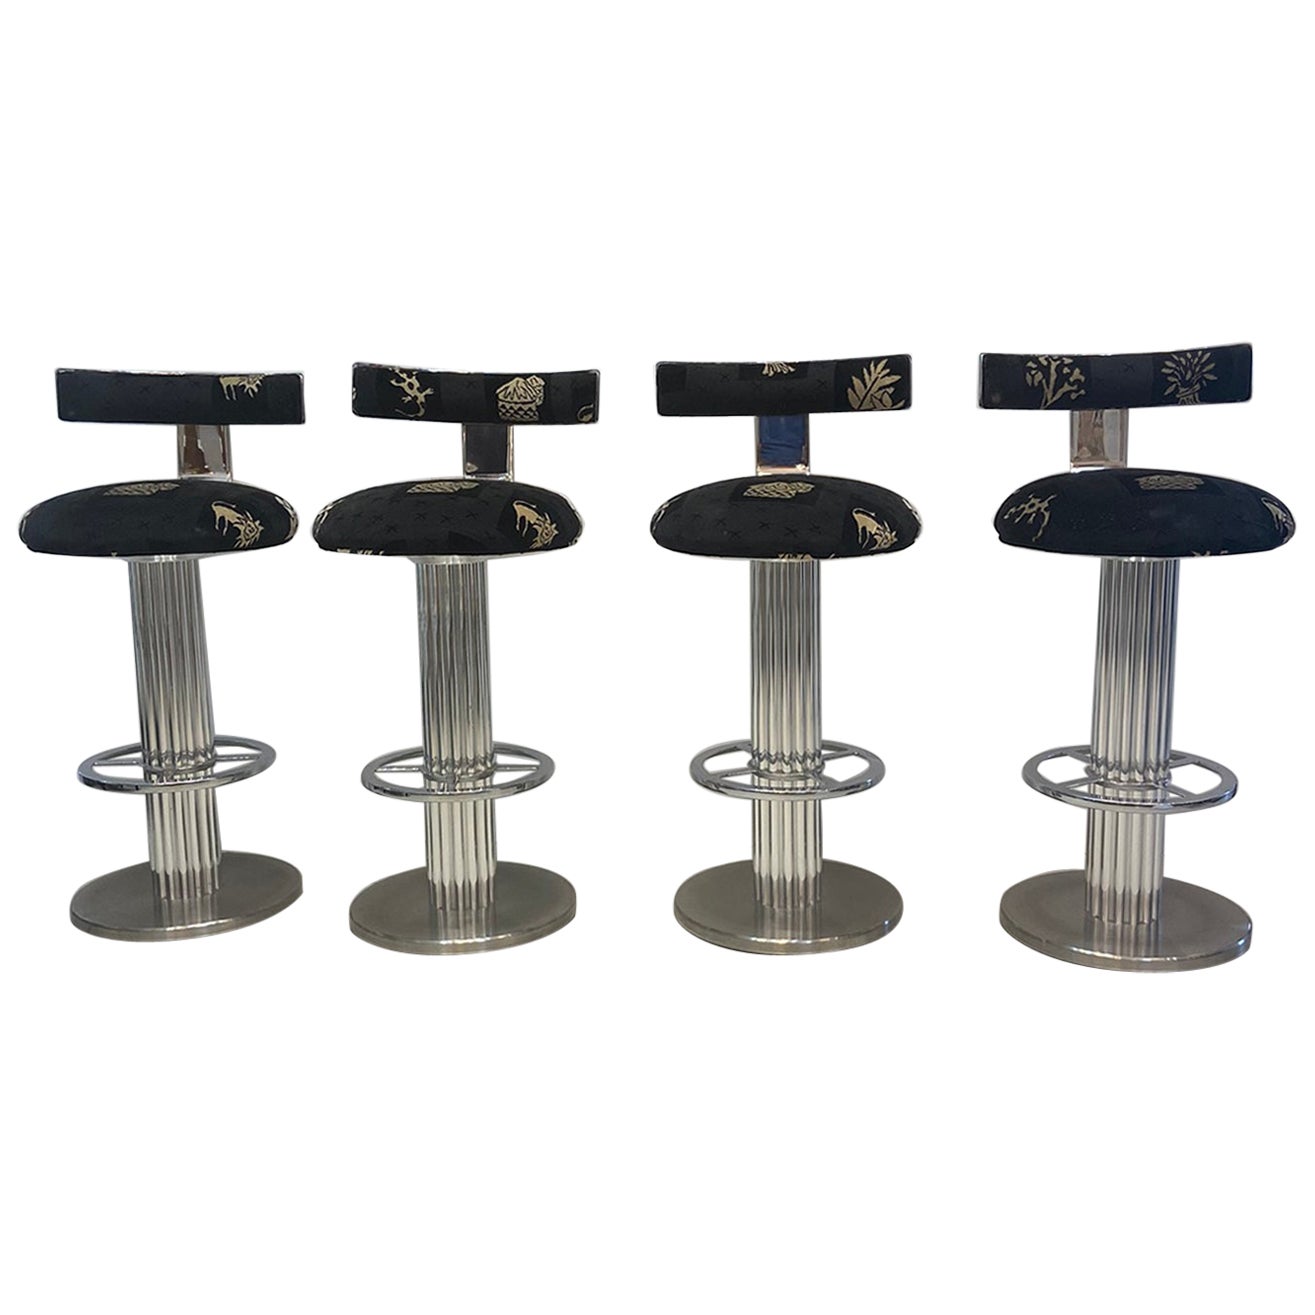 Four Designs for Leisure Bar Stools Chrome Steel, Swivel Chairs